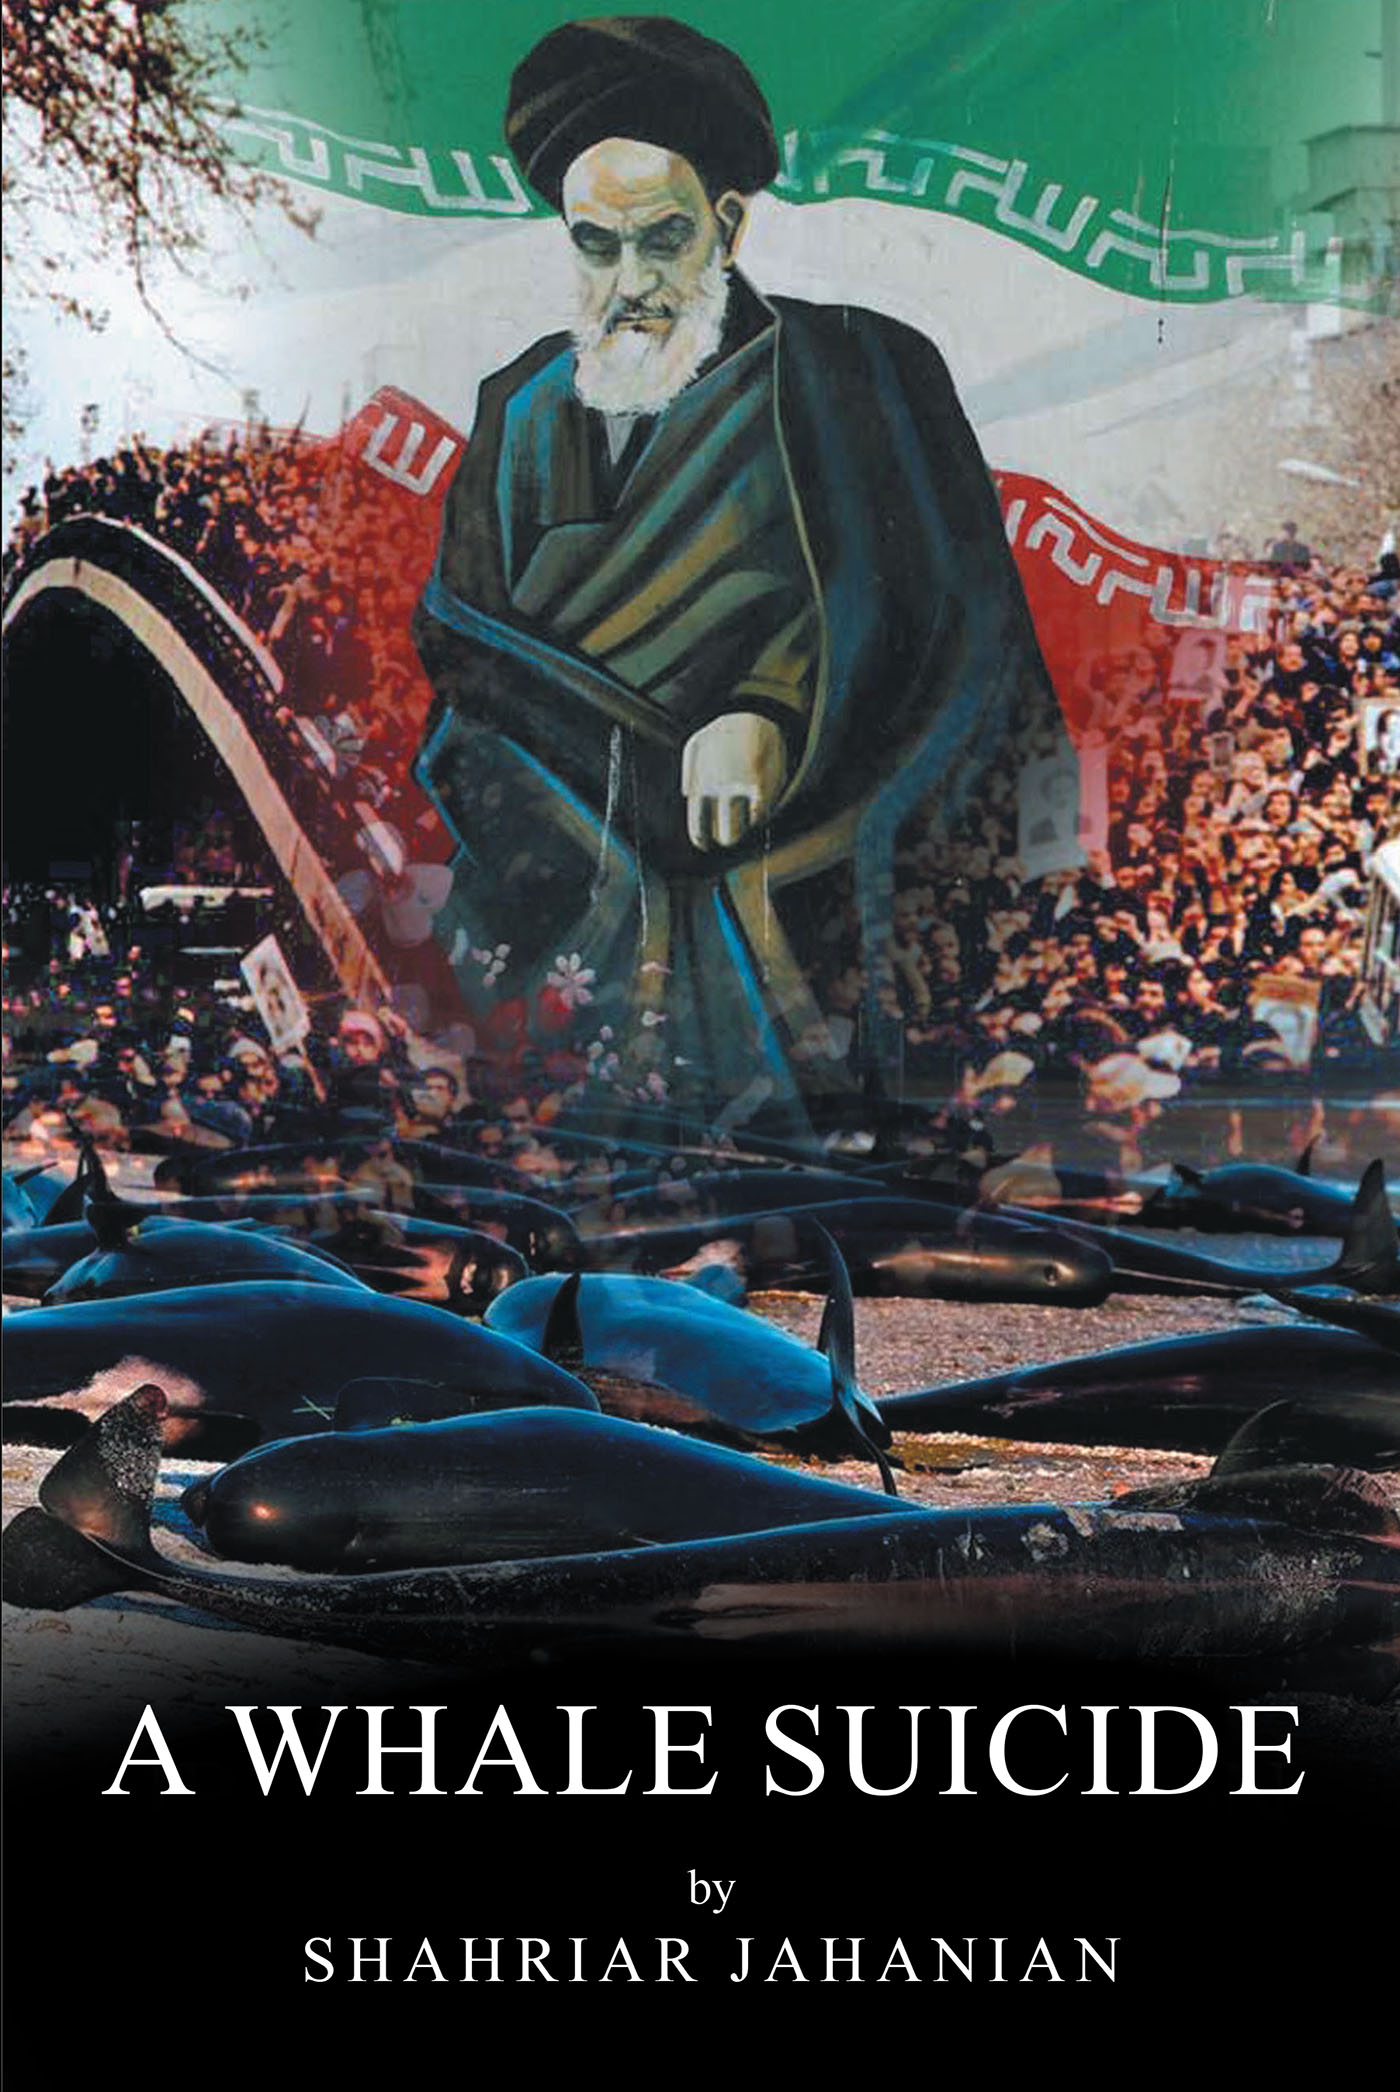 Author Shahriar Jahanian’s New Book, "A Whale Suicide," Reveals the Toll of the Iranian Revolution, as Told Through the Eye-Witness Account of the Author's Dear Friend